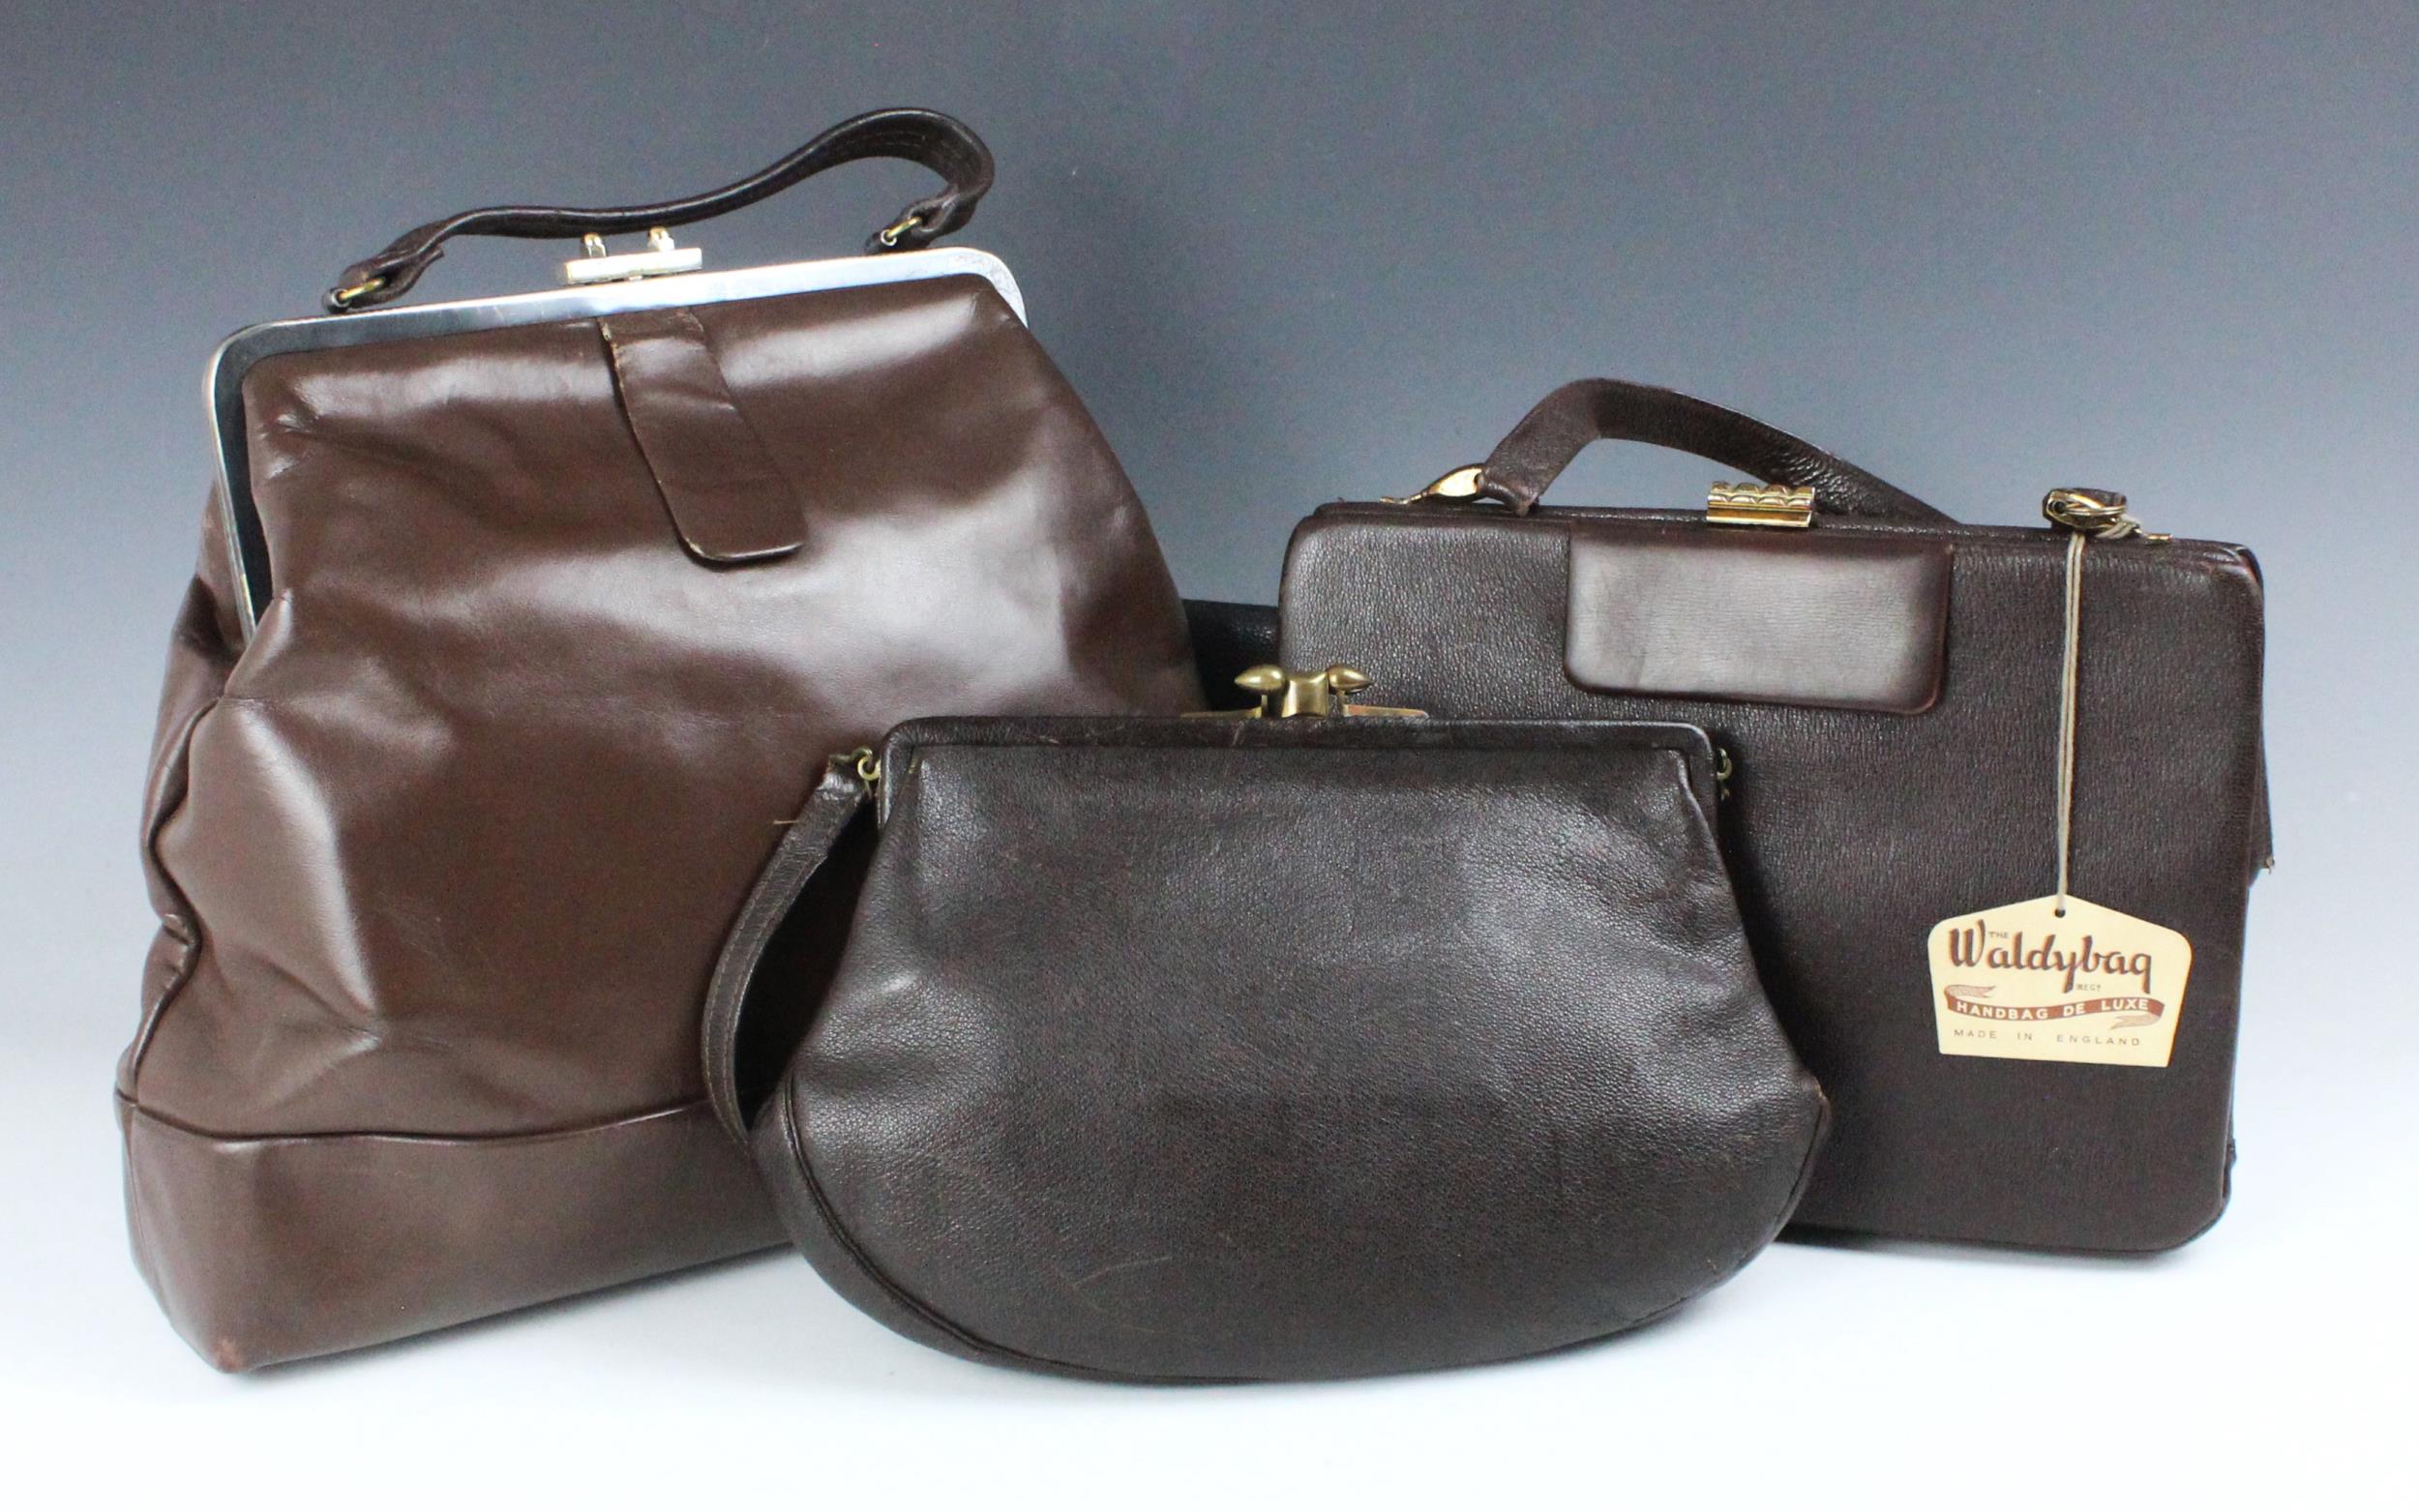 A brown leather handbag of tradition style, with original Waldybag label, together with three